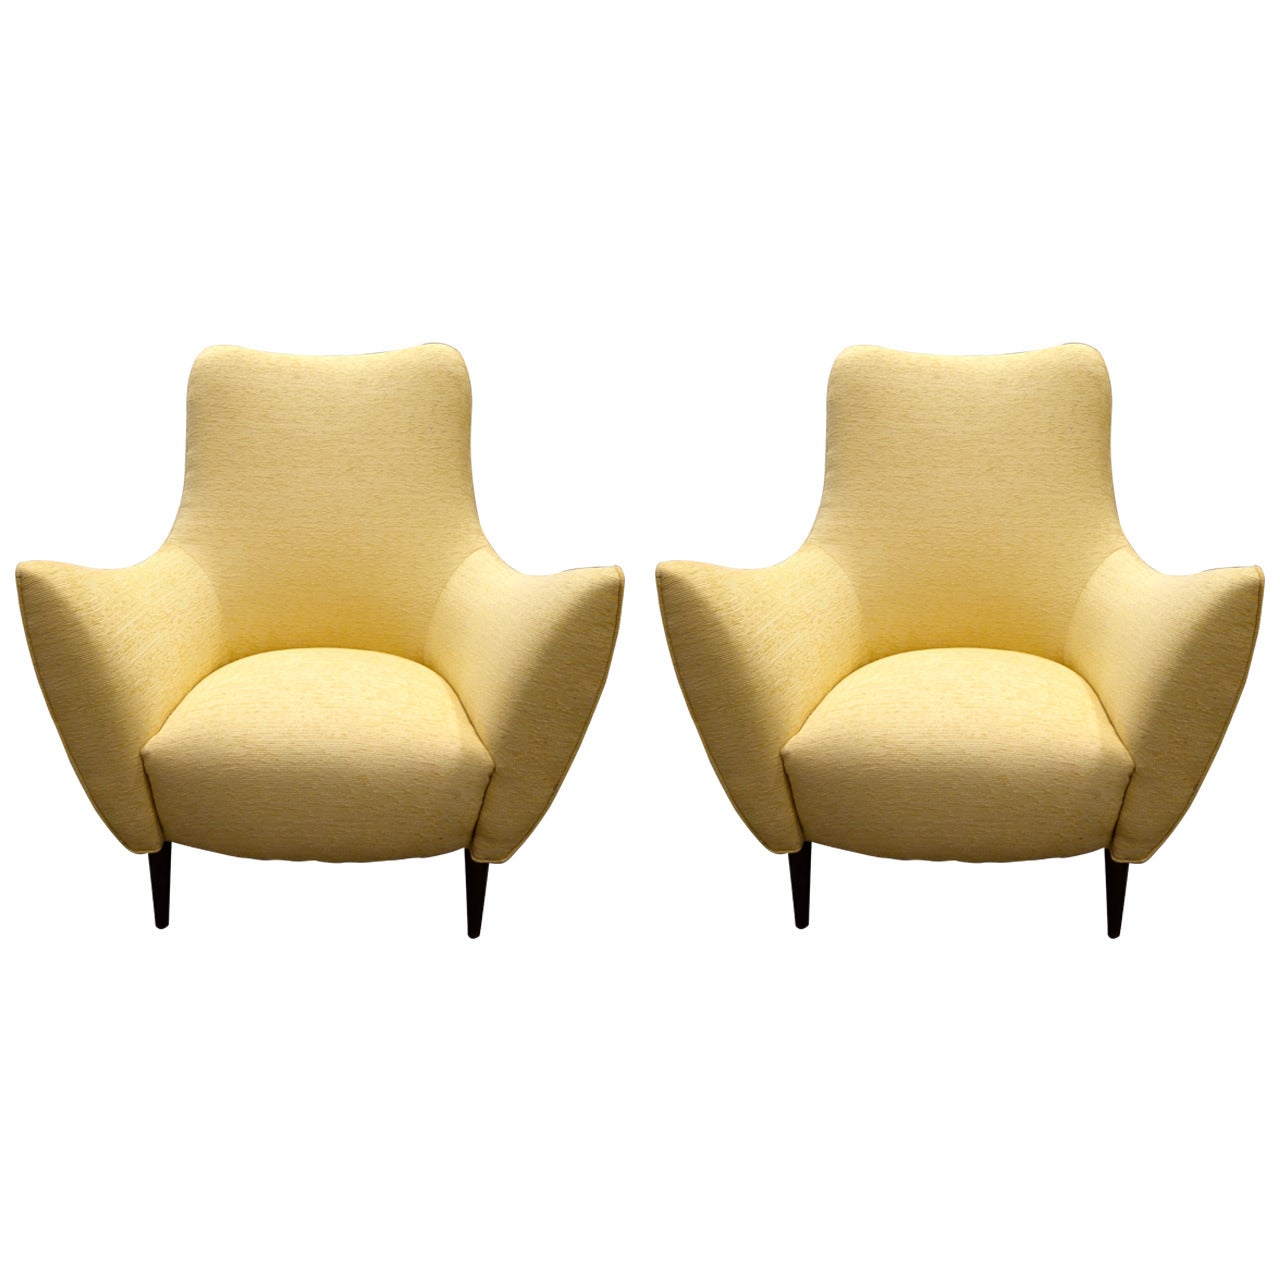 Pair of Large Mid-Century Style Italian Lounge or Armchairs with Flared Arms